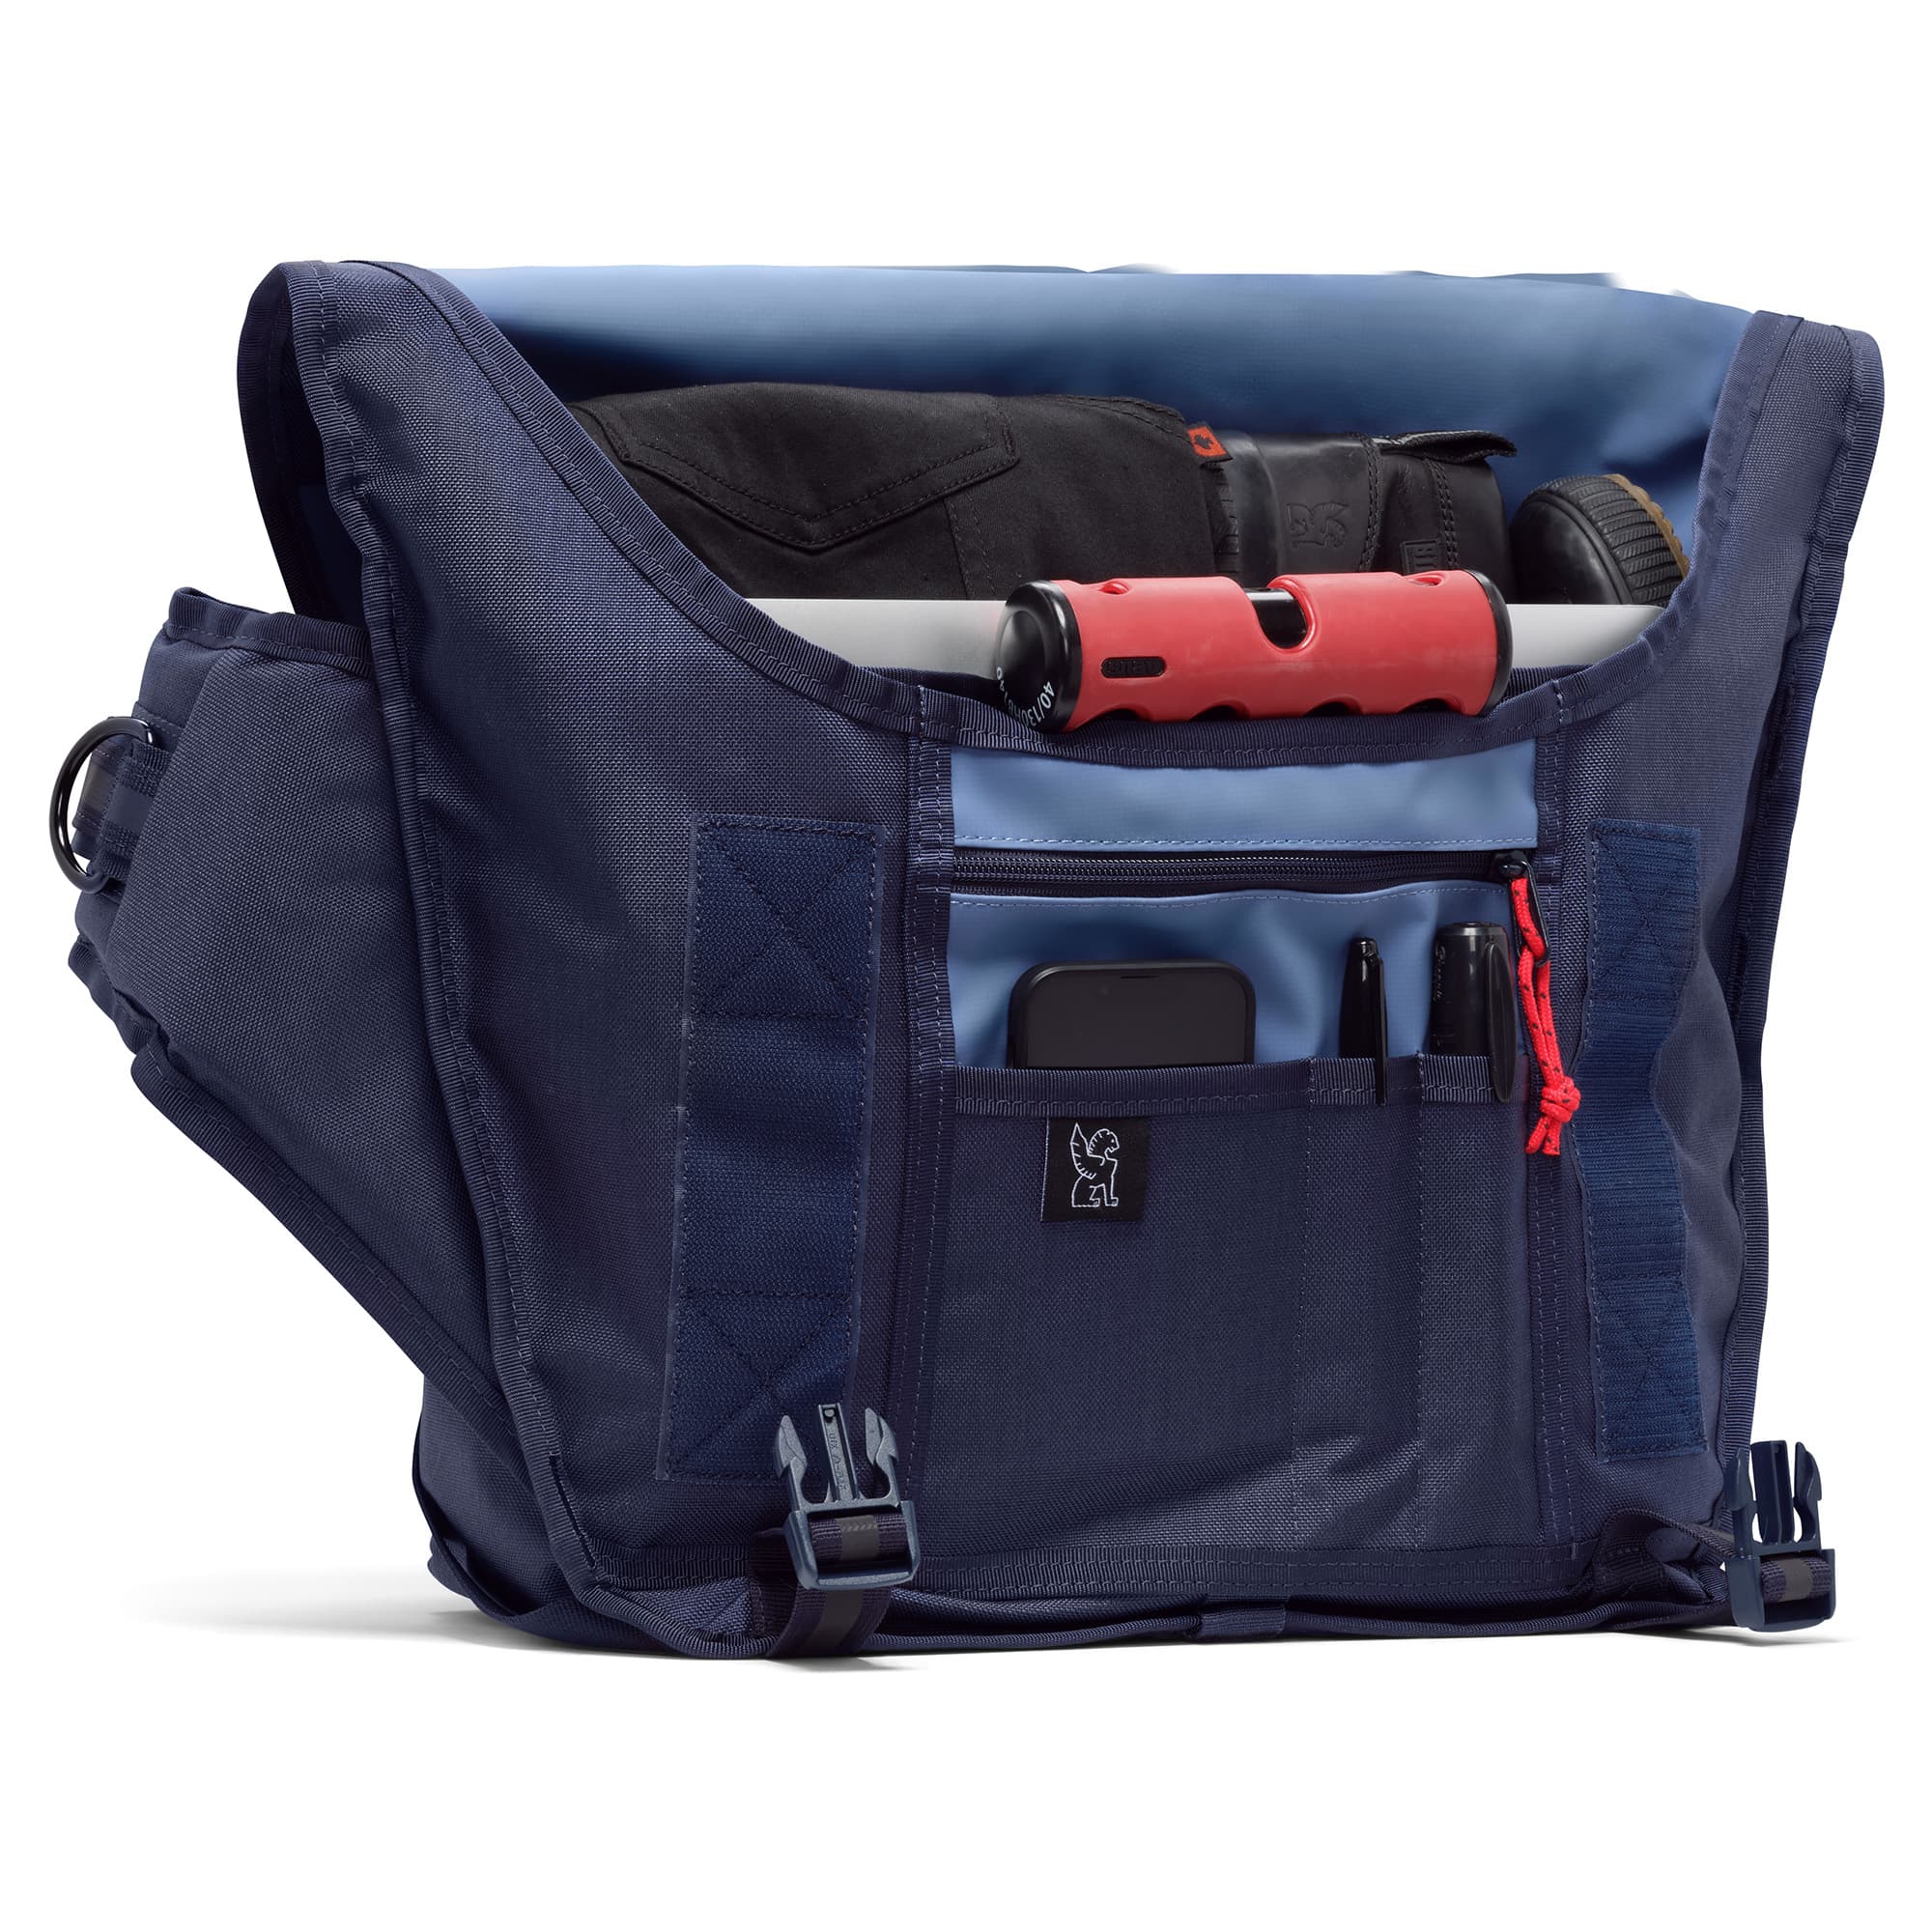 Mini Metro Messenger in blue inside build out #color_navy tritone